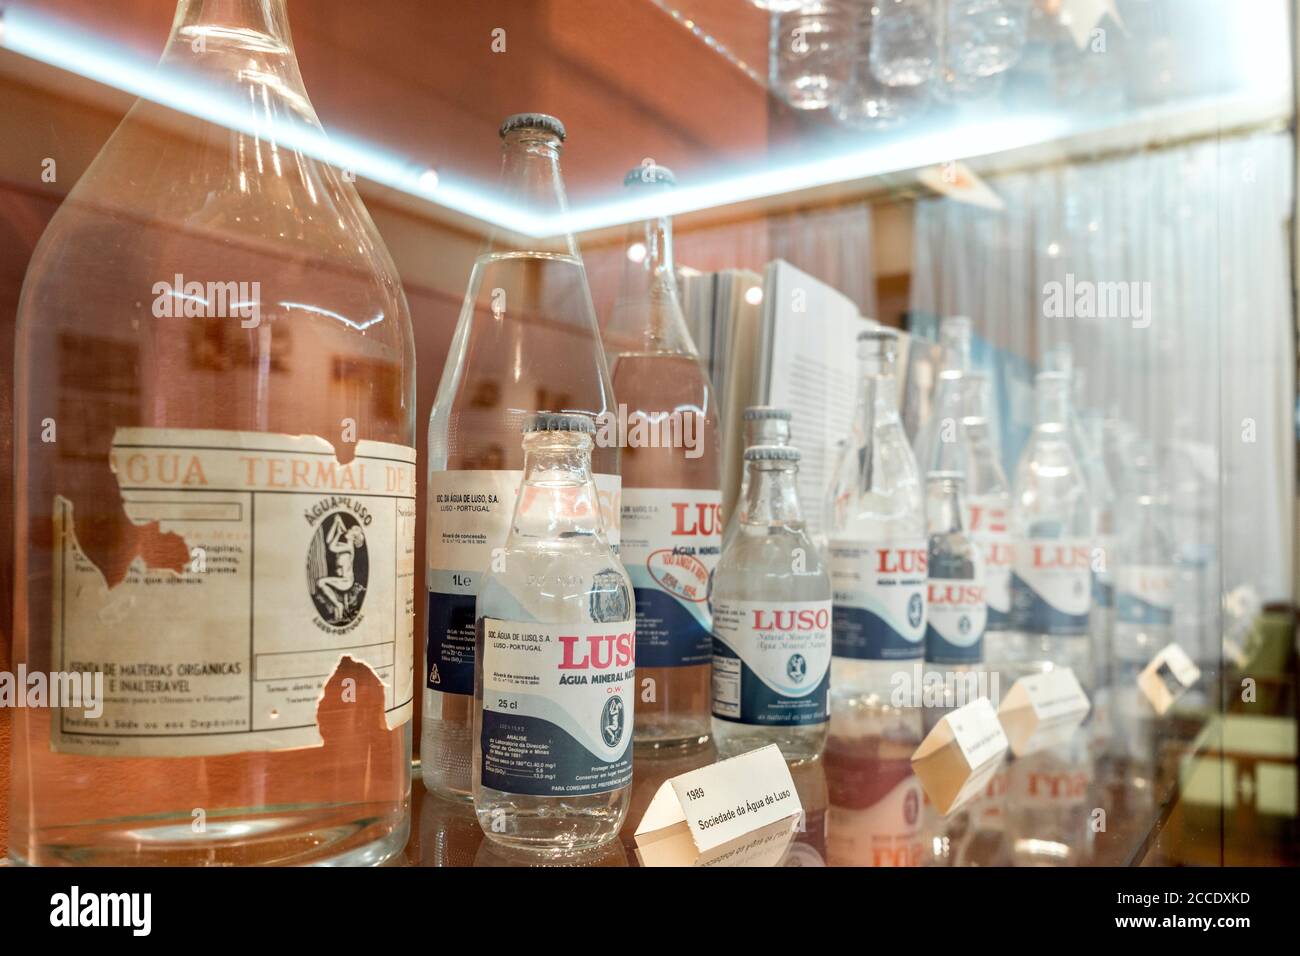 Luso, Portugal - December 14, 2019: Exhibition of bottles with thermal and mineral waters named Luso Stock Photo